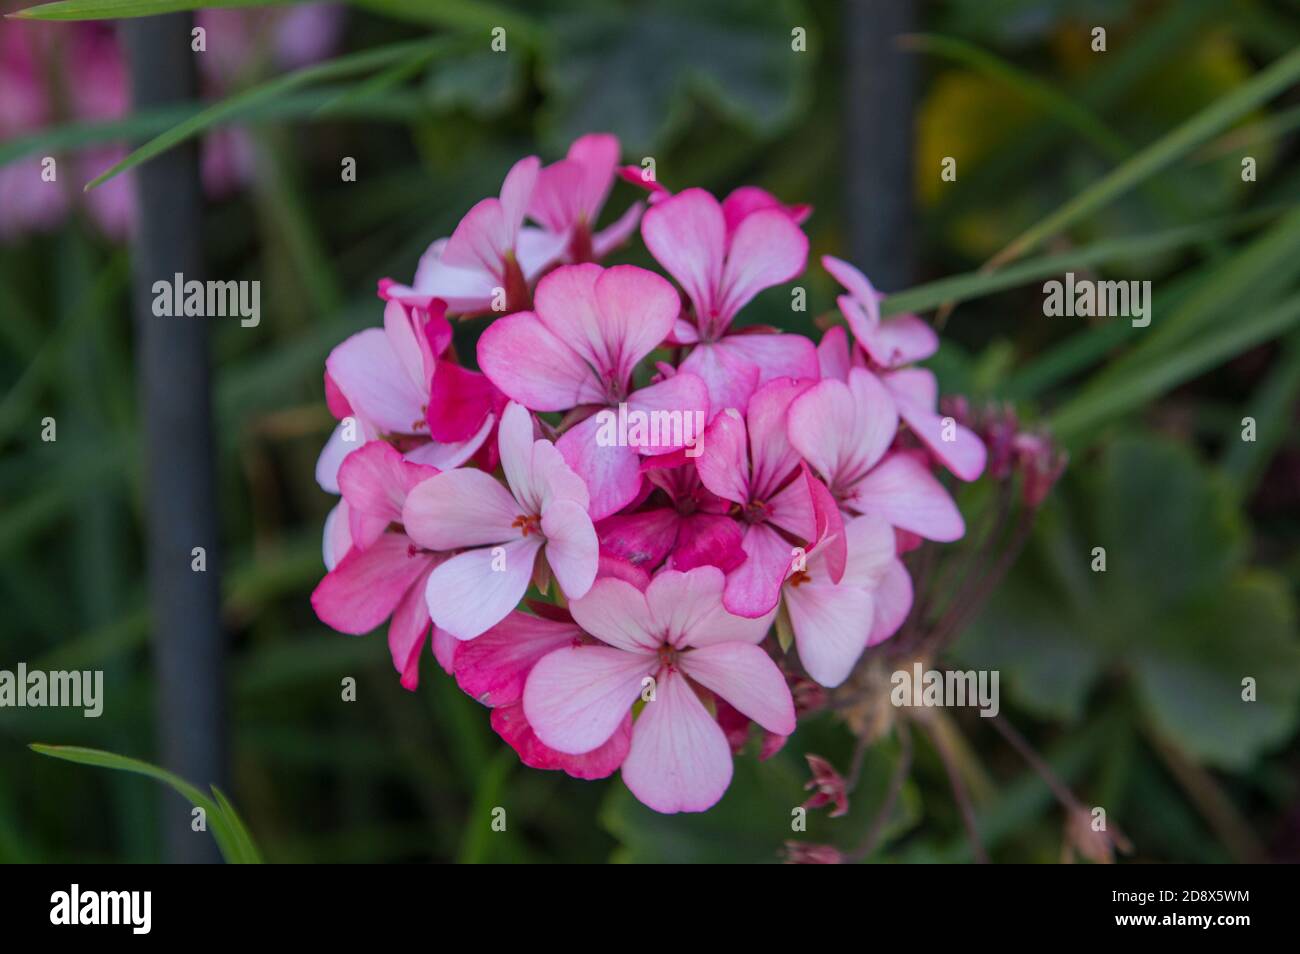 Pink flower on green background Stock Photo